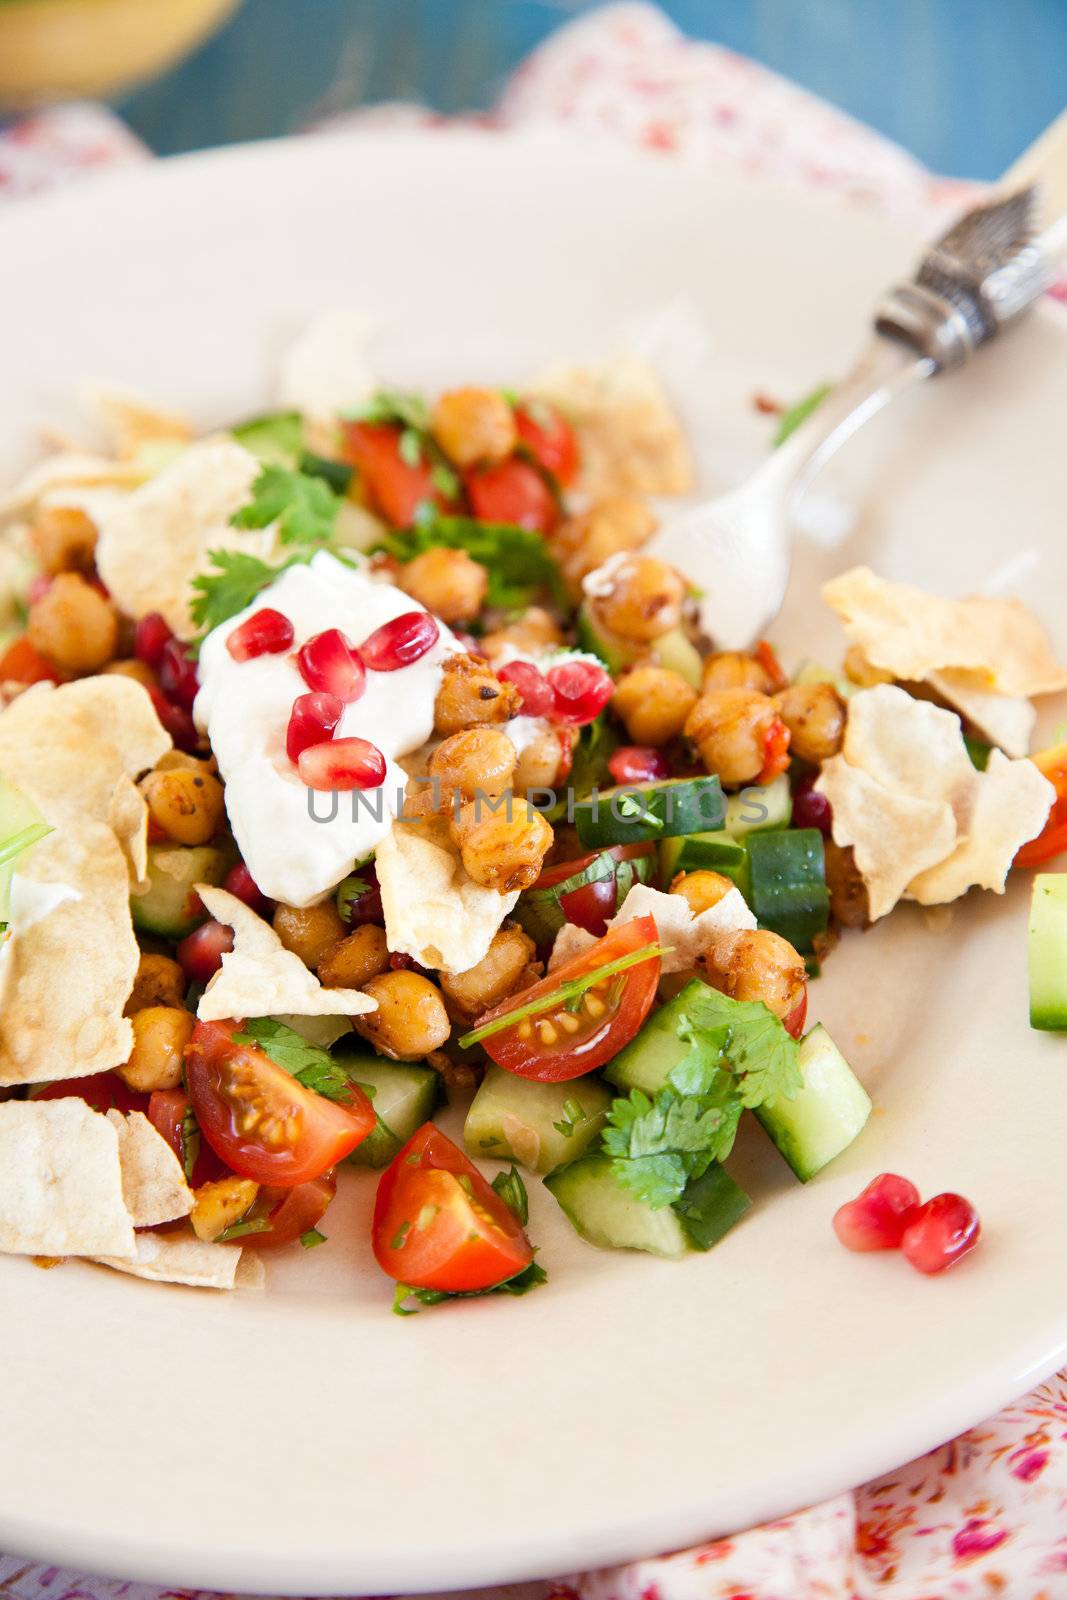 Delicious Indian salad with chickpeas and pomegranate